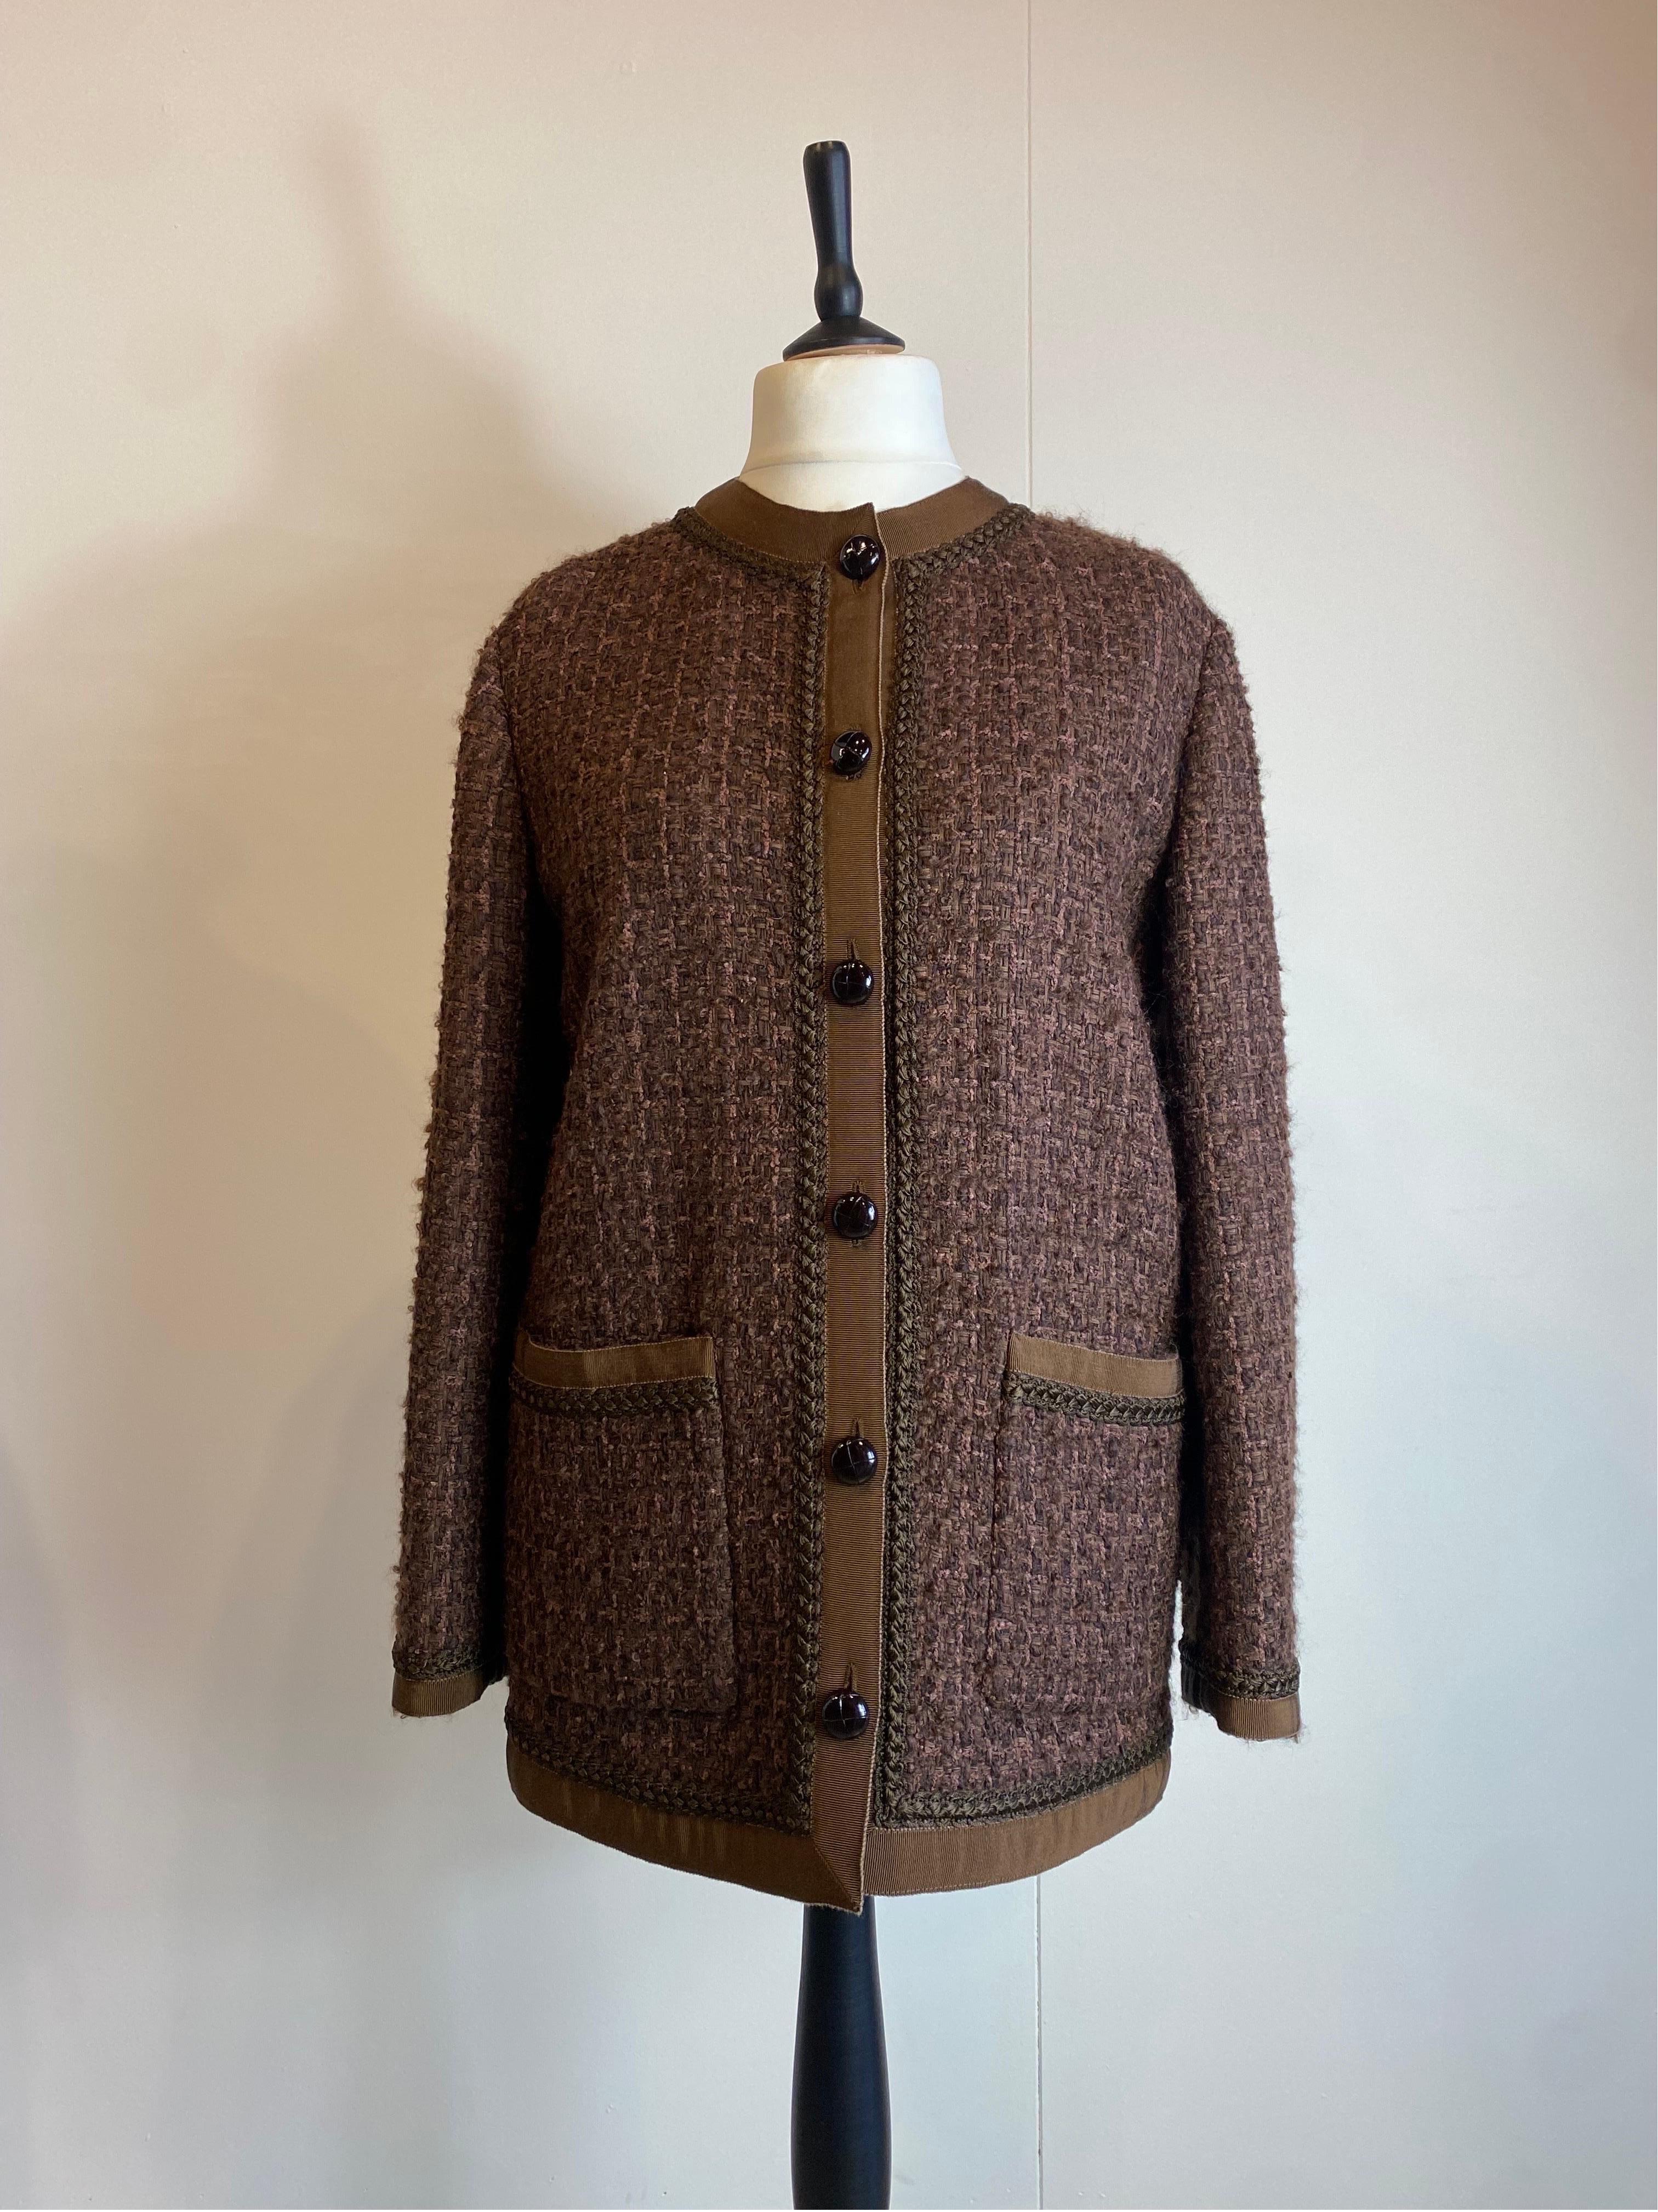 Gucci tweed wool Jacket In Excellent Condition For Sale In Carnate, IT